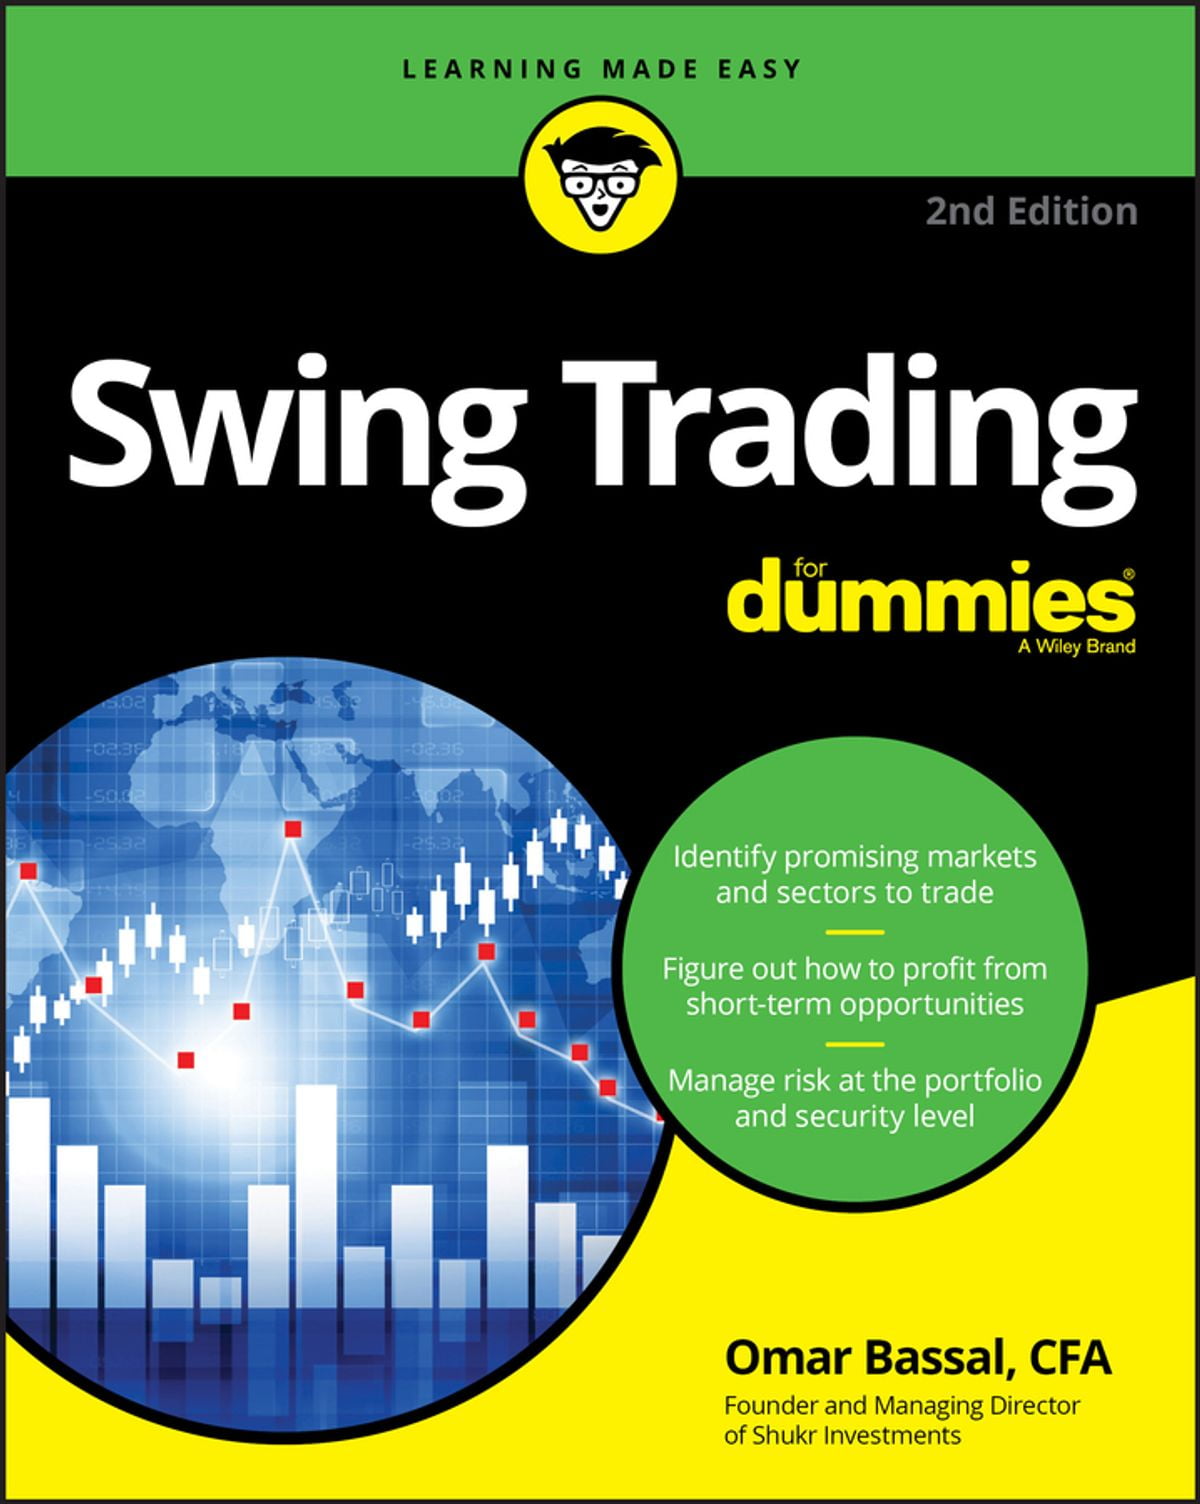 currency trading for dummies ebook